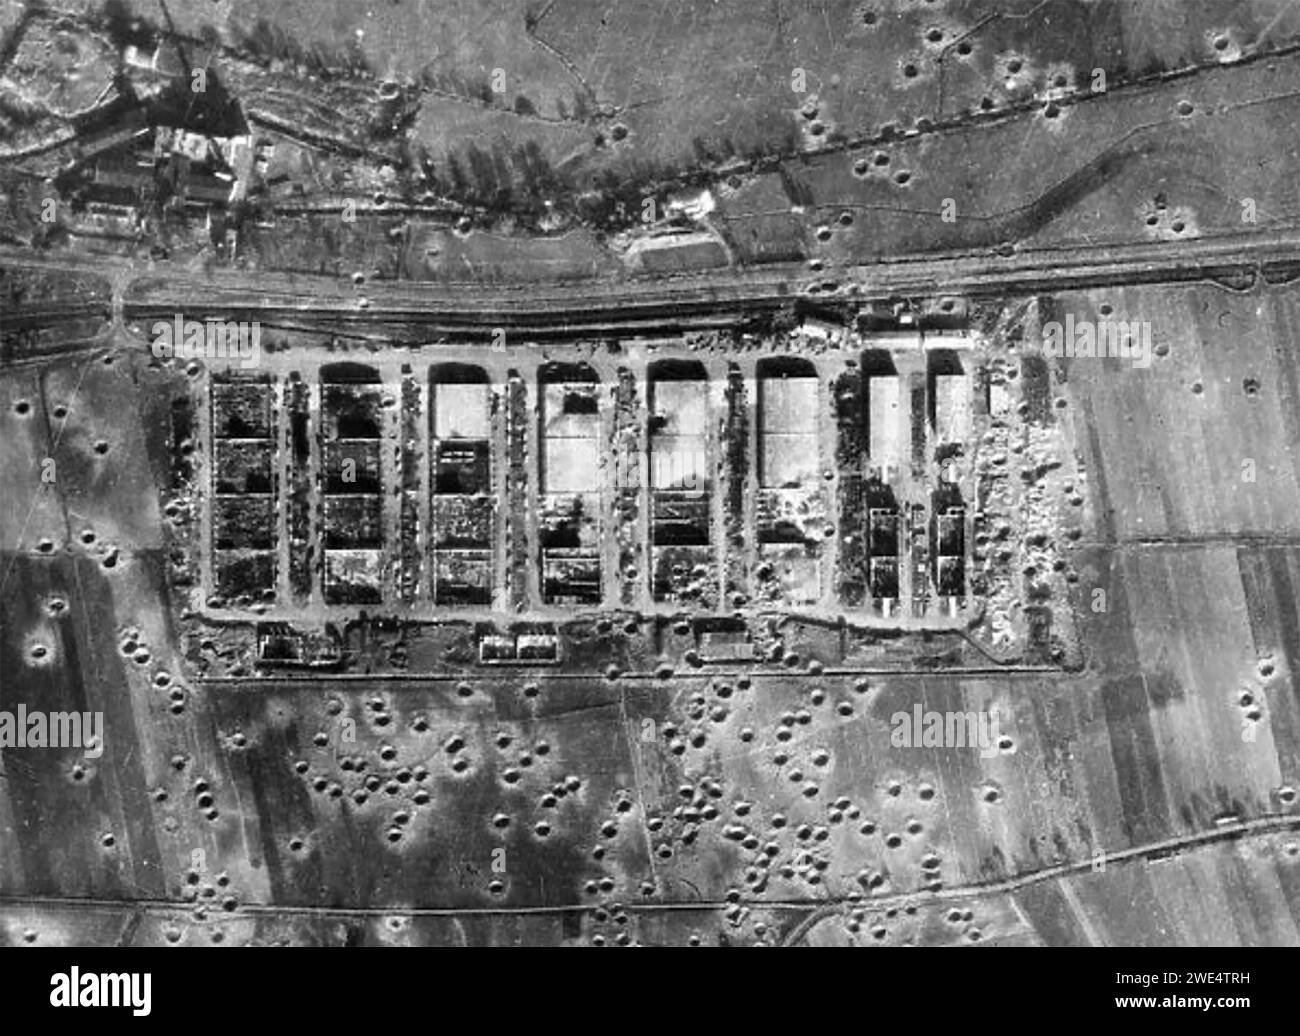 BETTENHAUSEN, Germany.  Ordnance works  110 miles north west of Cologne,  after a daylight bombing attack by US 8th Air Force on 2 October 944. Stock Photo